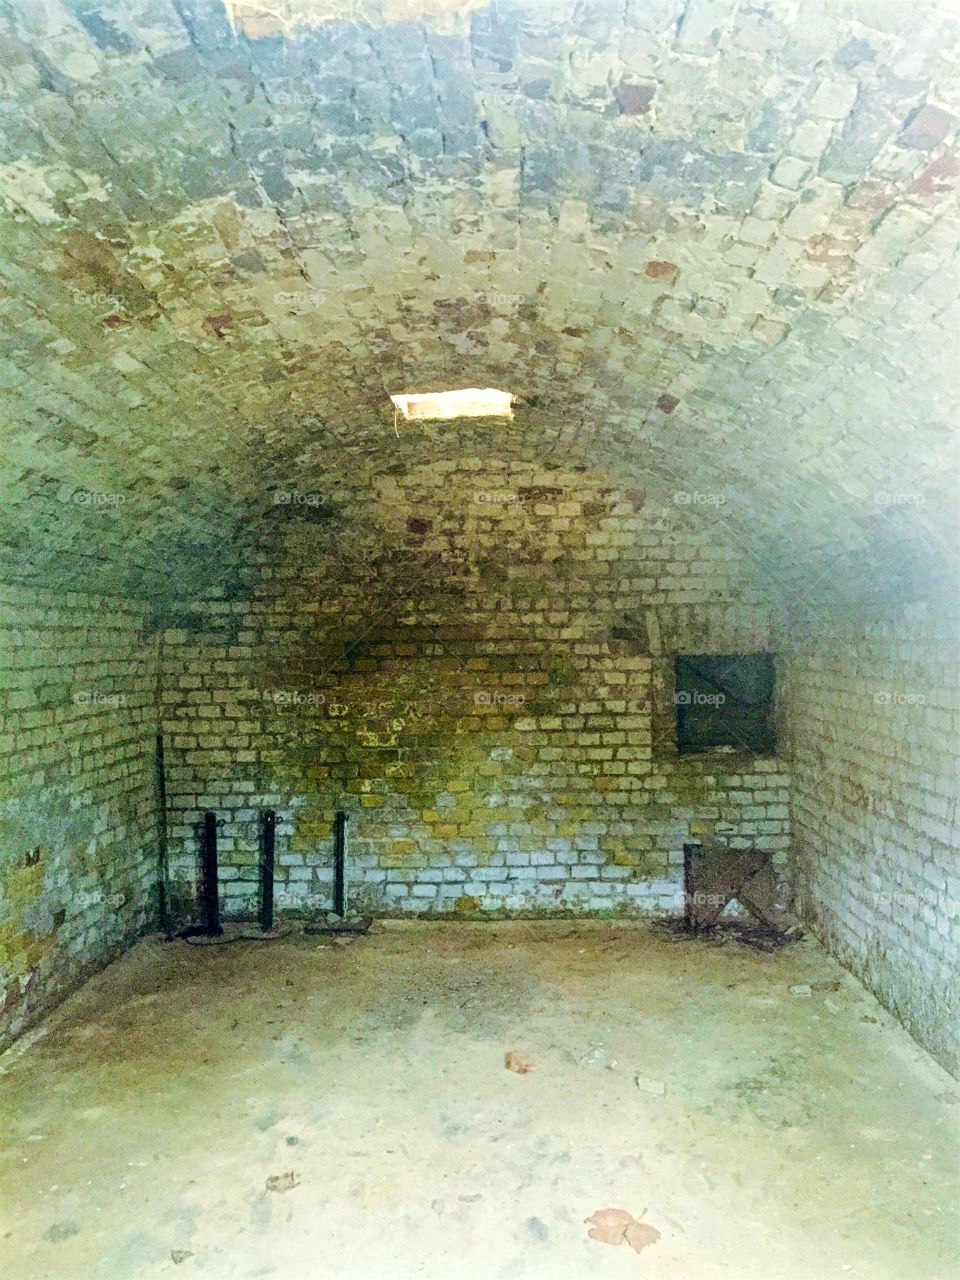 Gas chamber, Sachsenhausen.. Sachsenhausen concentrationcamp, germany. One of many gas chambers... :(